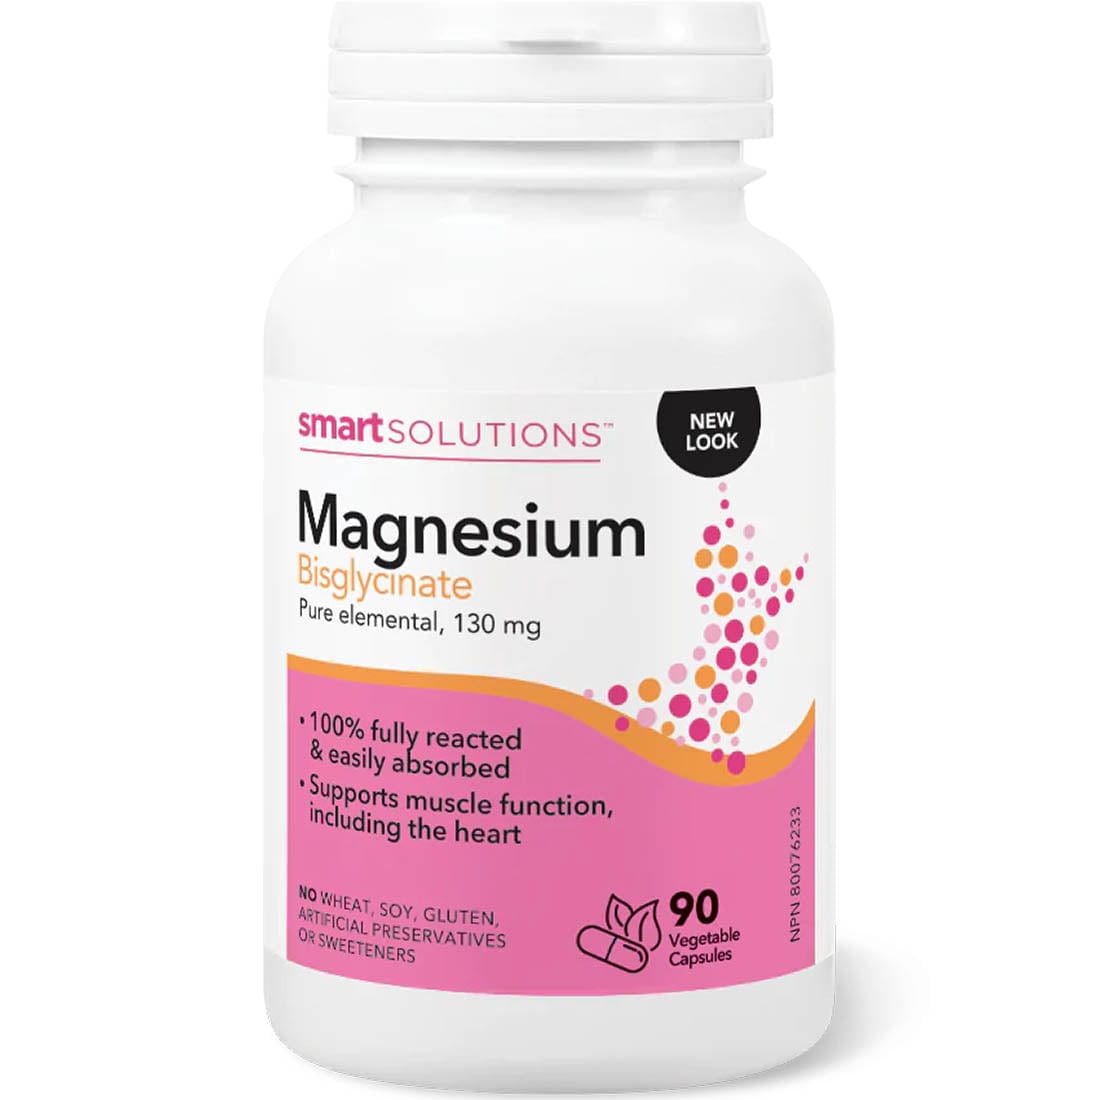 Smart Solutions Magnesium Bisglycinate 130mg Capsules, 100% fully reacted and easily absorbed (Formerly Lorna Vanderhaeghe)